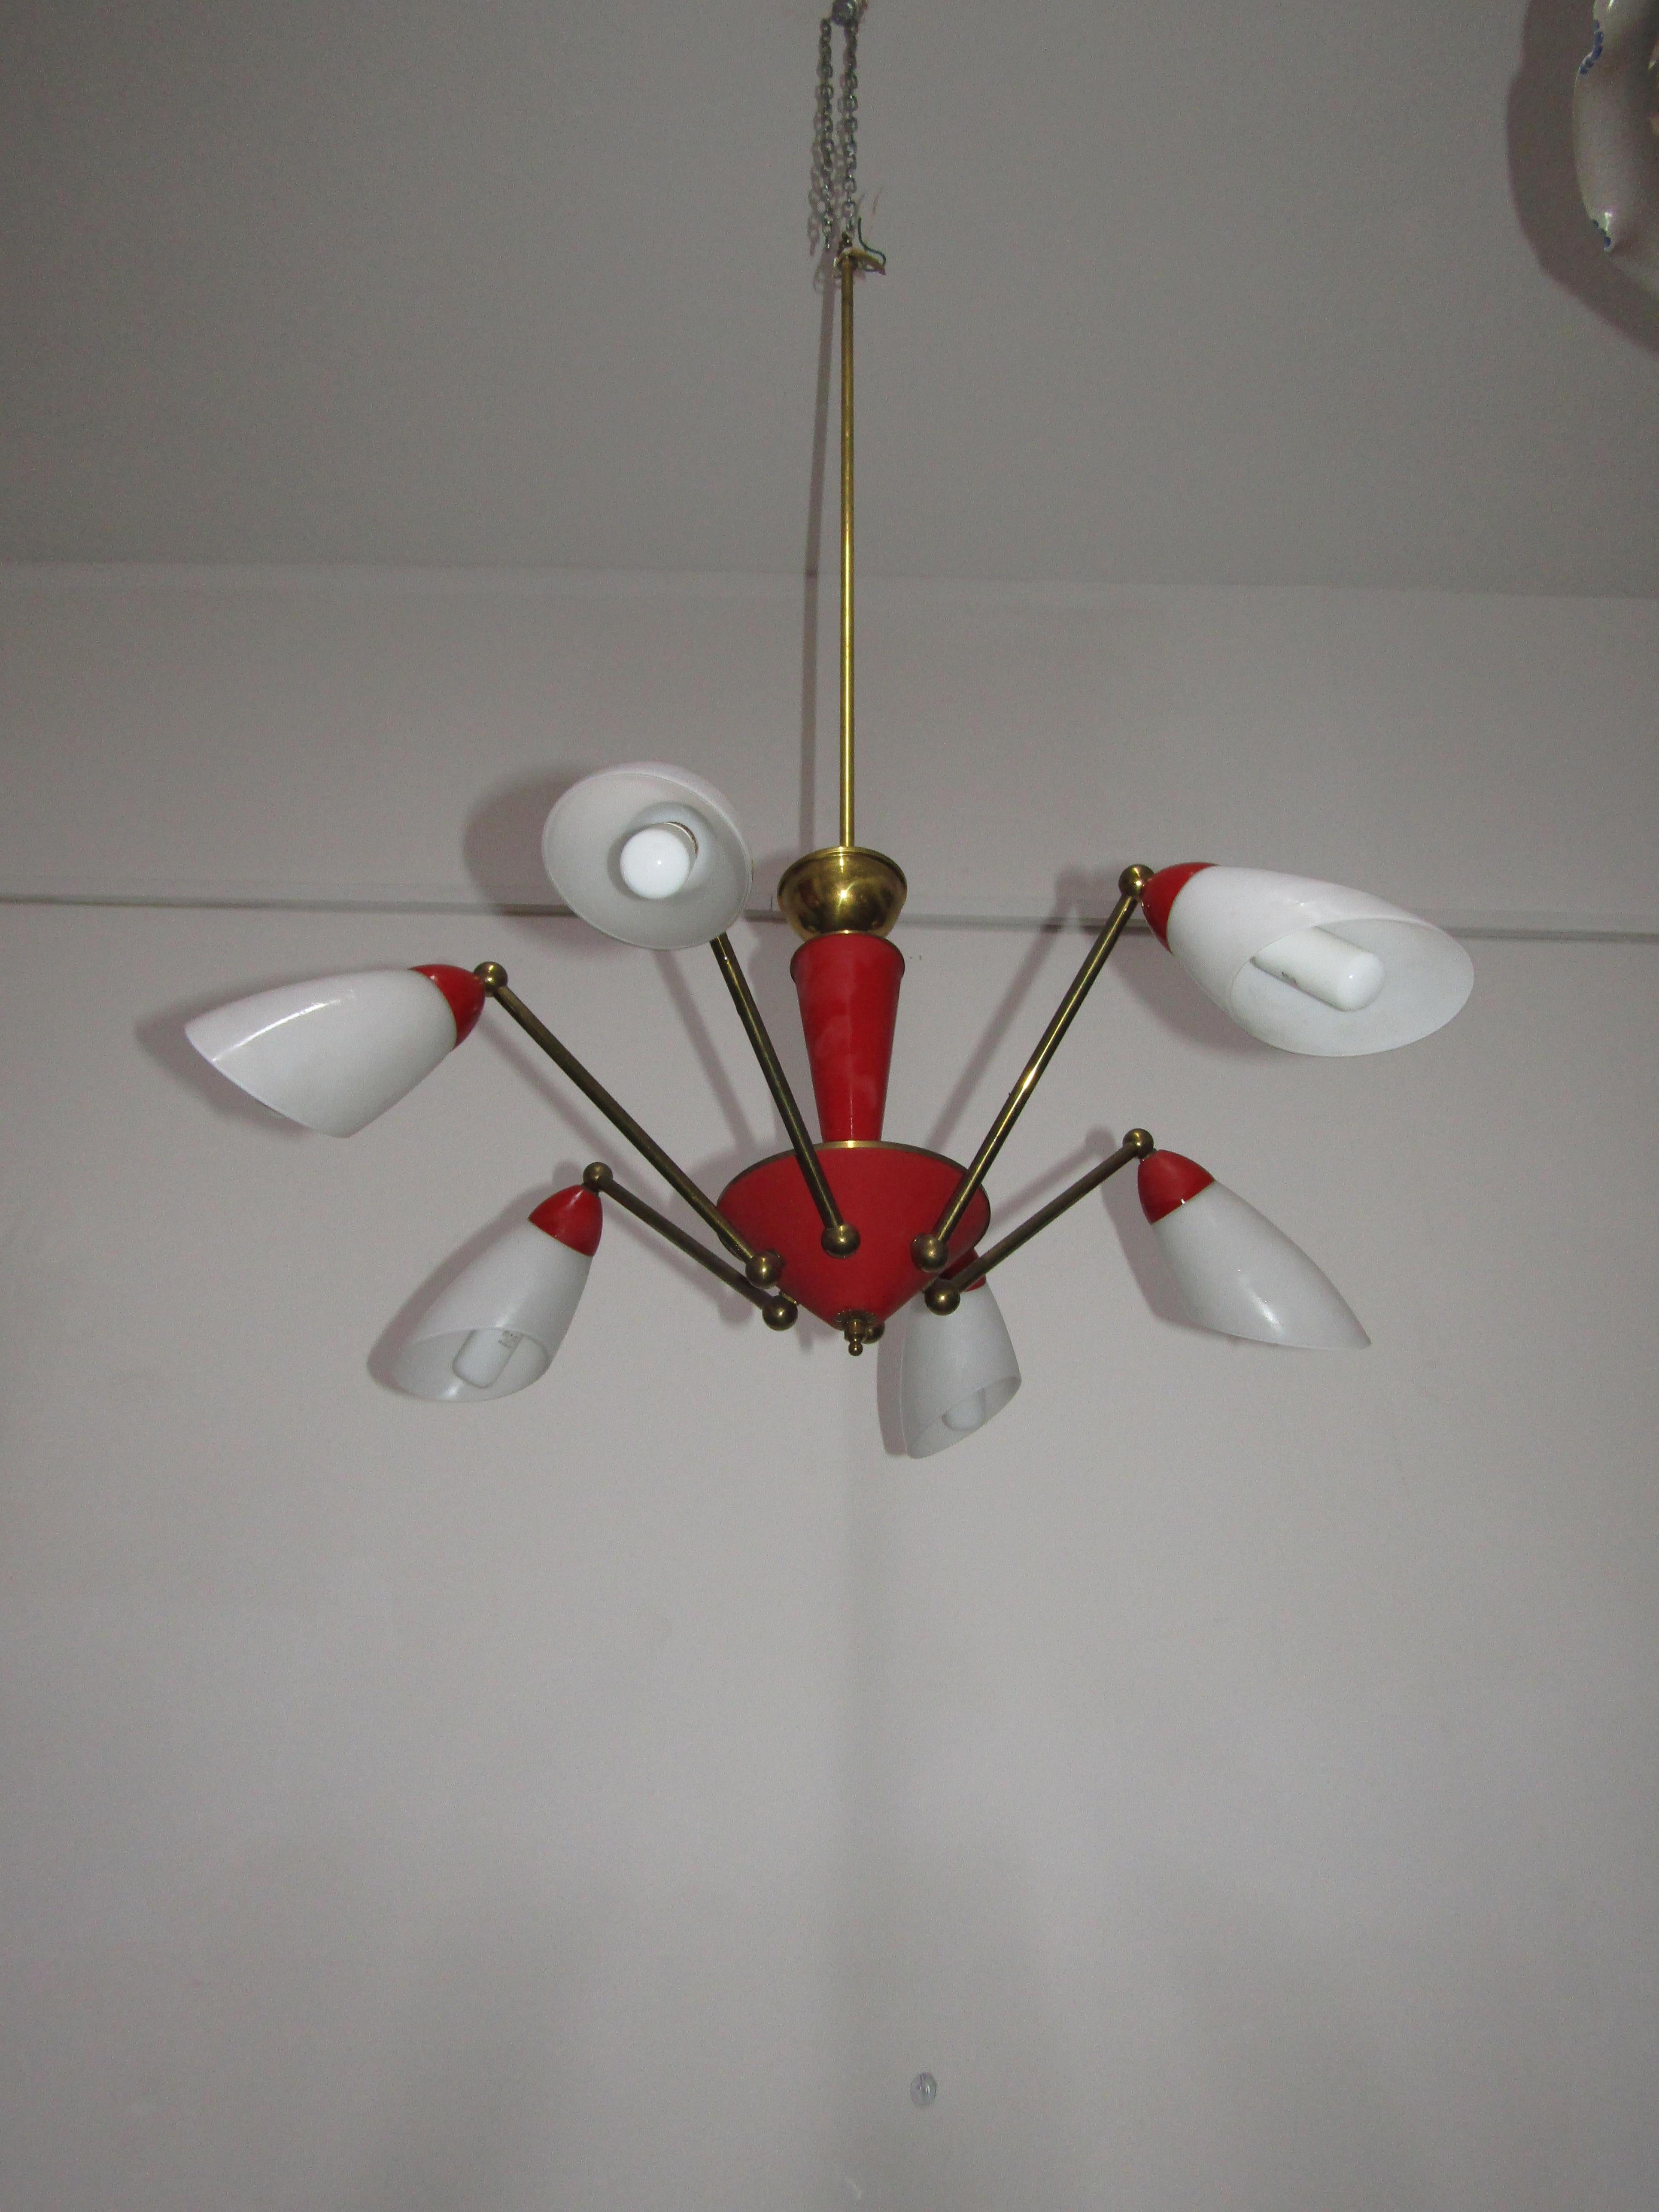 Sputnik Stilnovo chandelier with six arms and opal glass lampshades. The structure is in brass and parts in red painted aluminum.